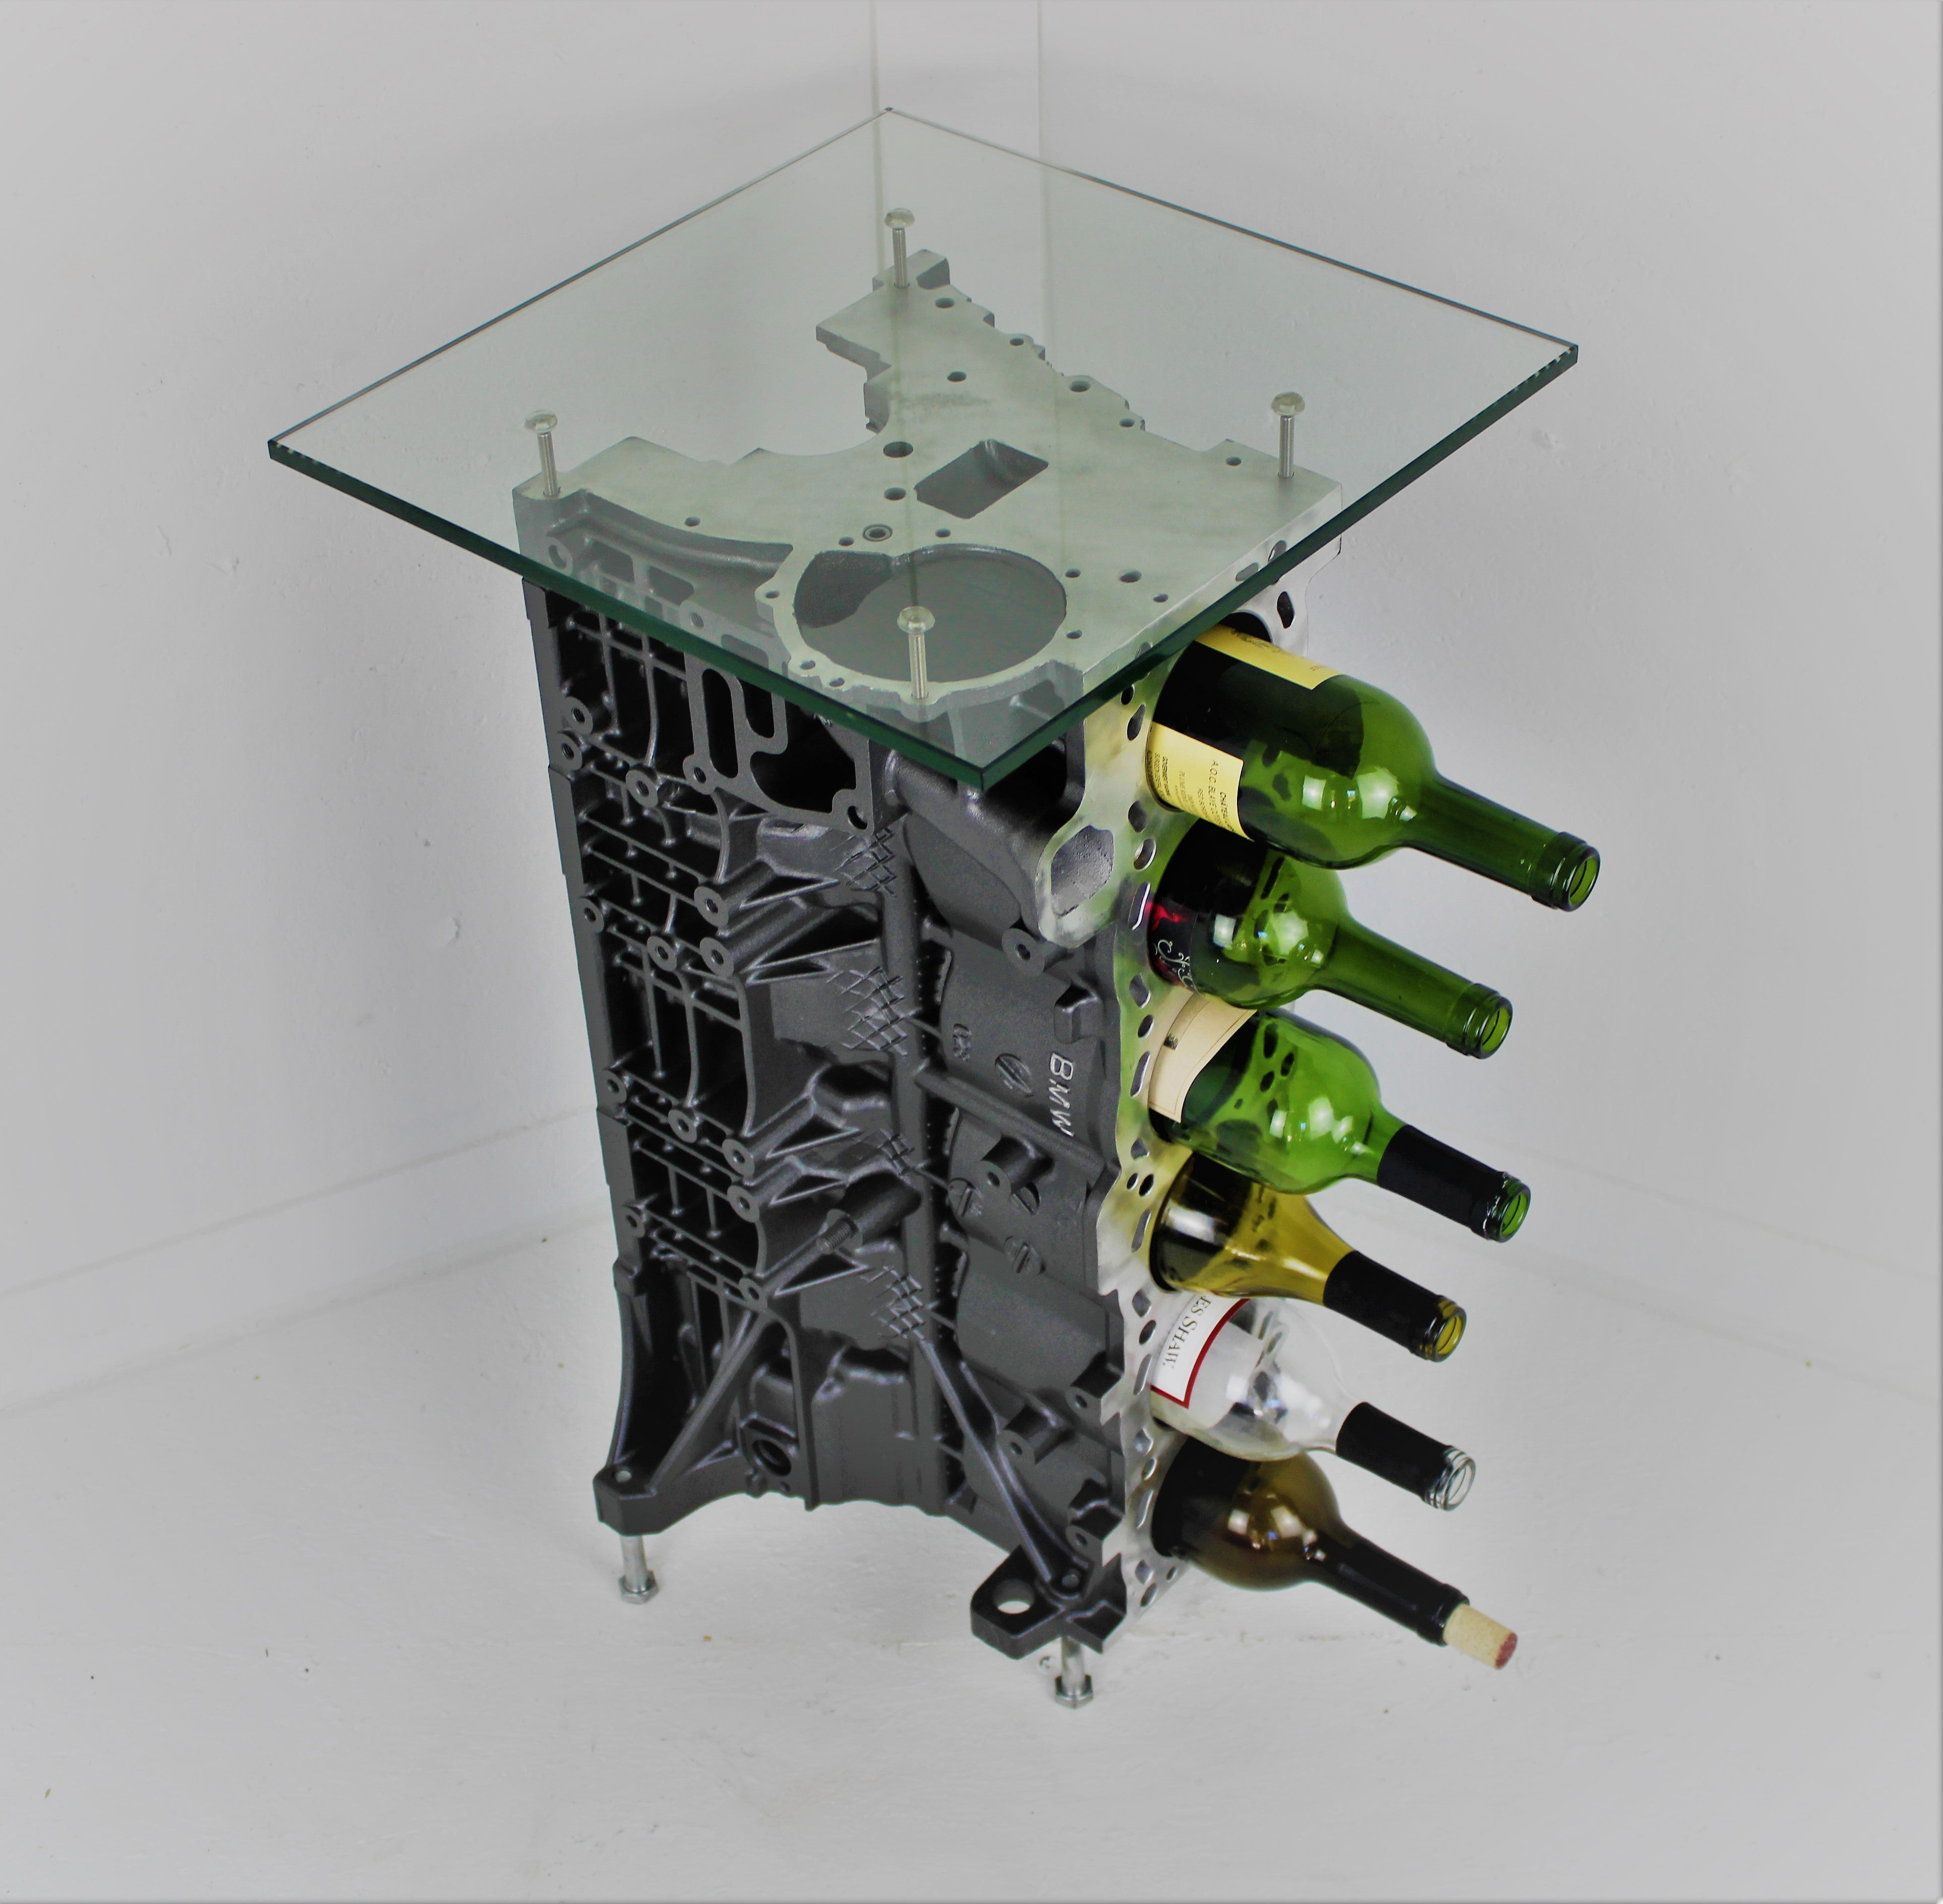 BMW end table and wine rack with six wine bottles stored inside, finished in gunmetal grey with a square glass top.